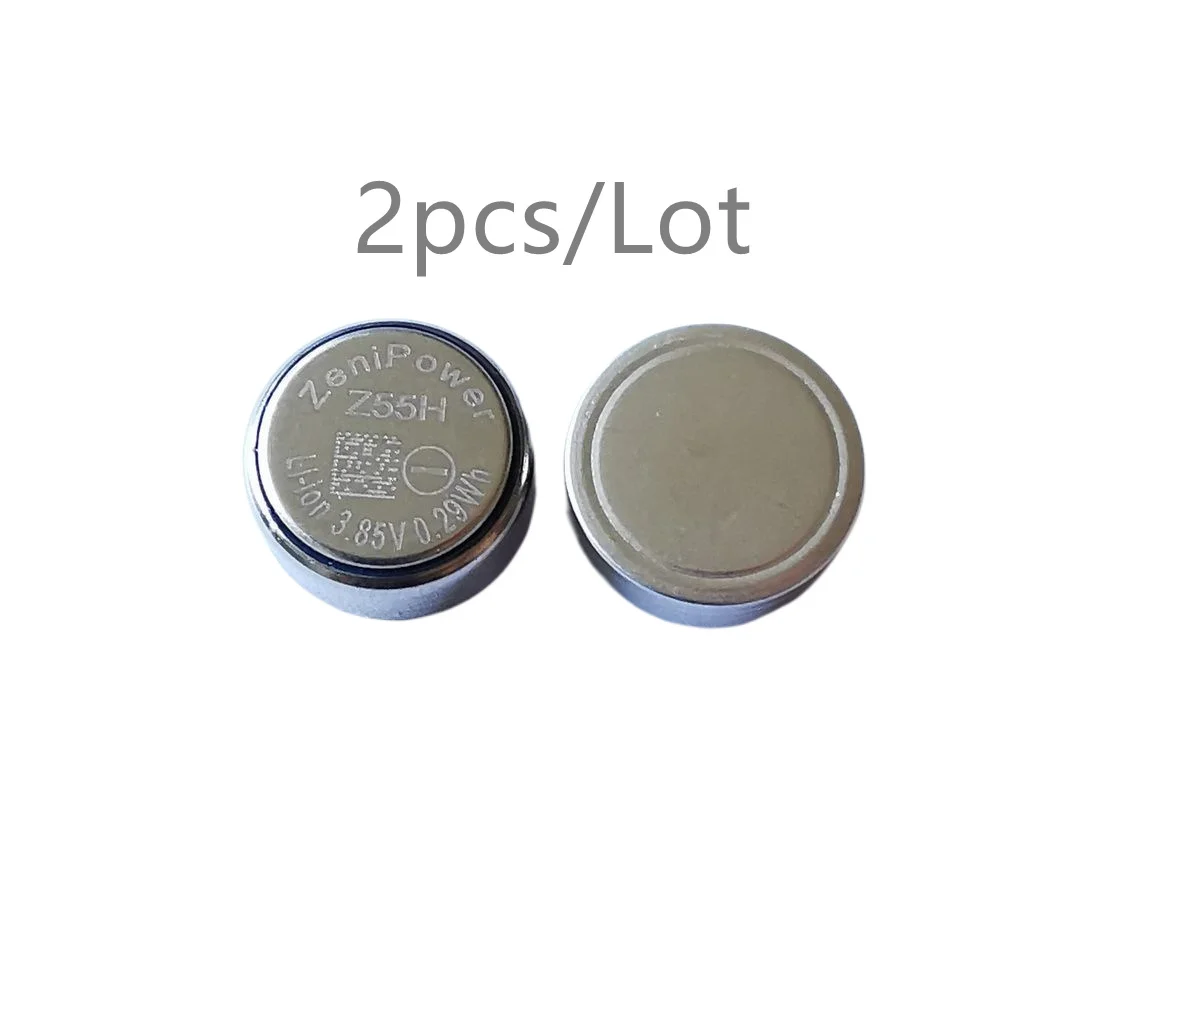 

2PCS ZeniPower replacement CP1254 1254 for Sony WF-1000XM4 XM4 Bluetooth Headset Battery 3.85V 75mAh Z55H